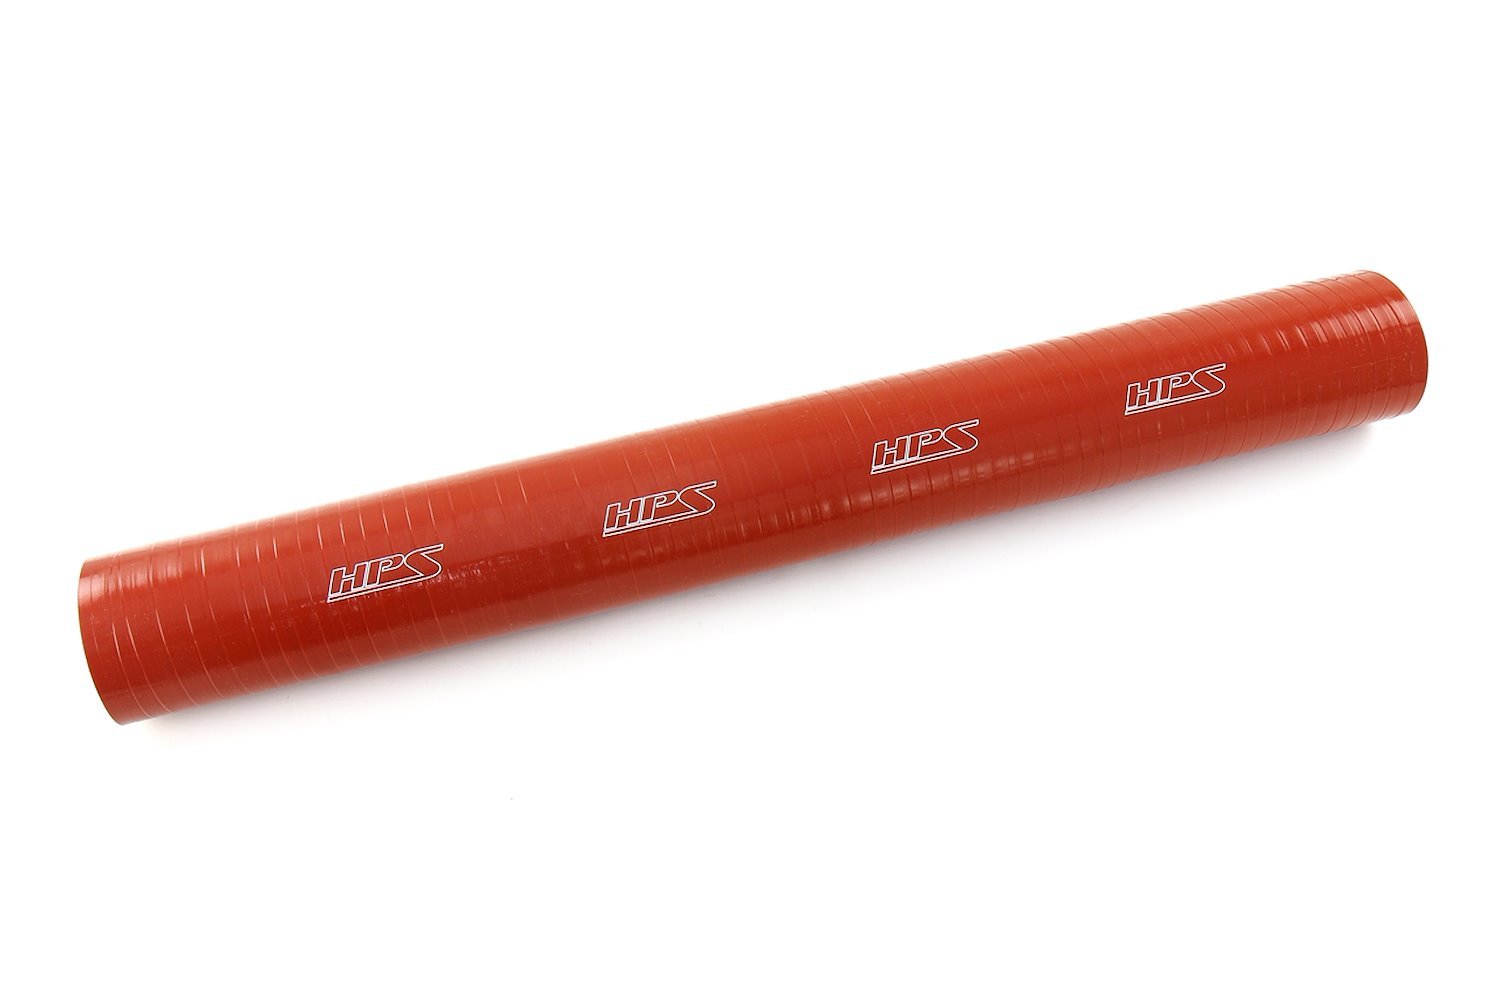 ST-3F-325-HOT Silicone Coolant Tube, Ultra High-Temp 4-Ply Reinforced, 3-1/4 in. ID, 3 ft. Long